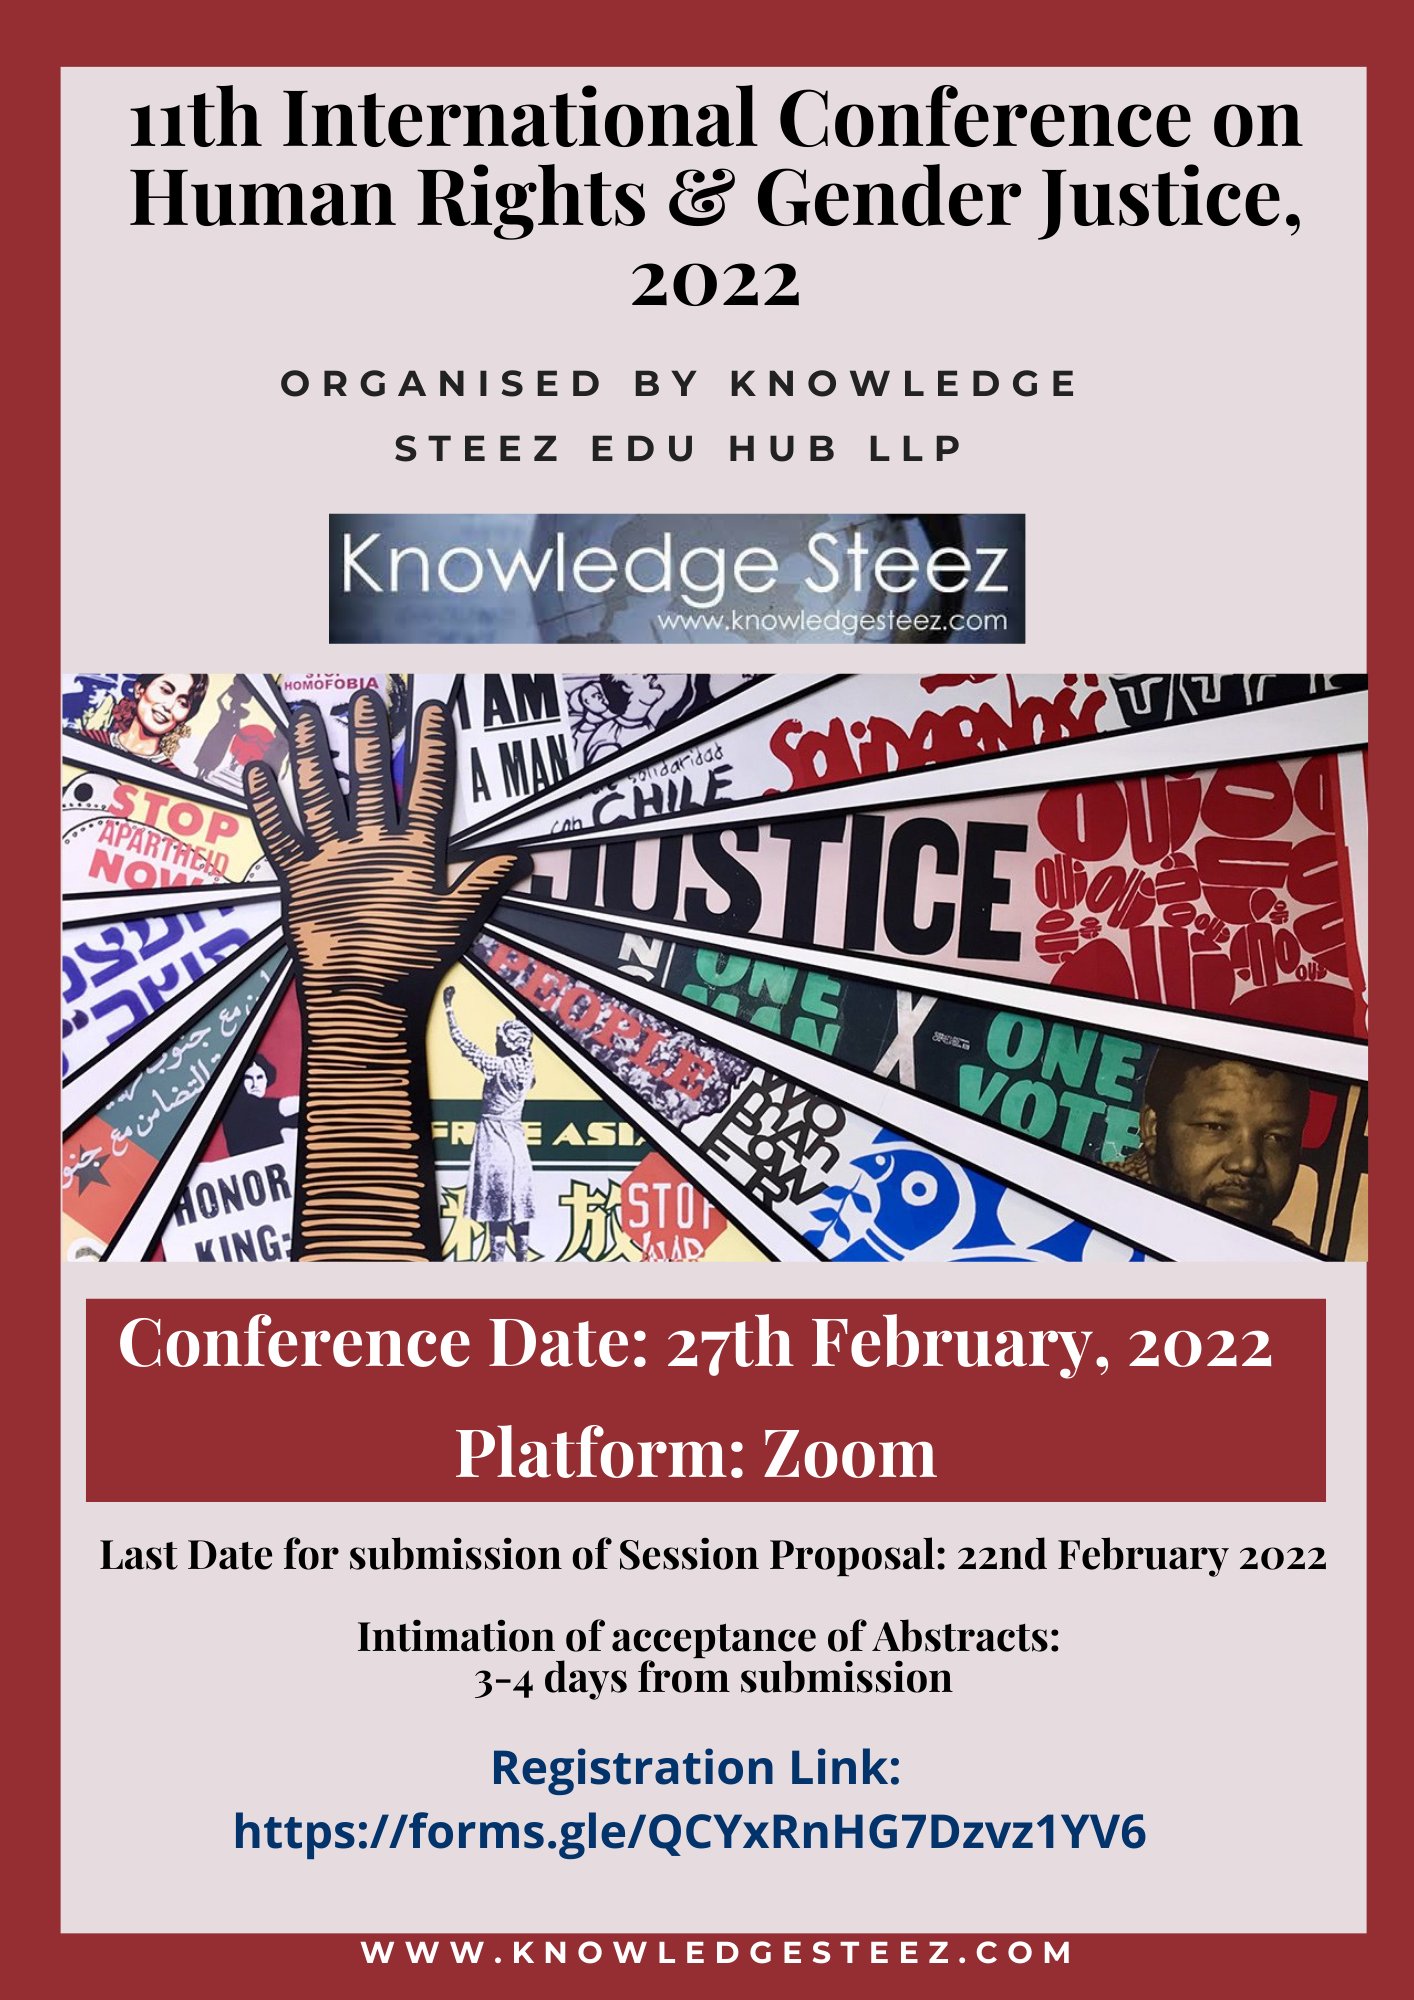 11th International Conference on Human Rights Gender Justice, 2022 Organised by Knowledge Steez EDU HUB LLP